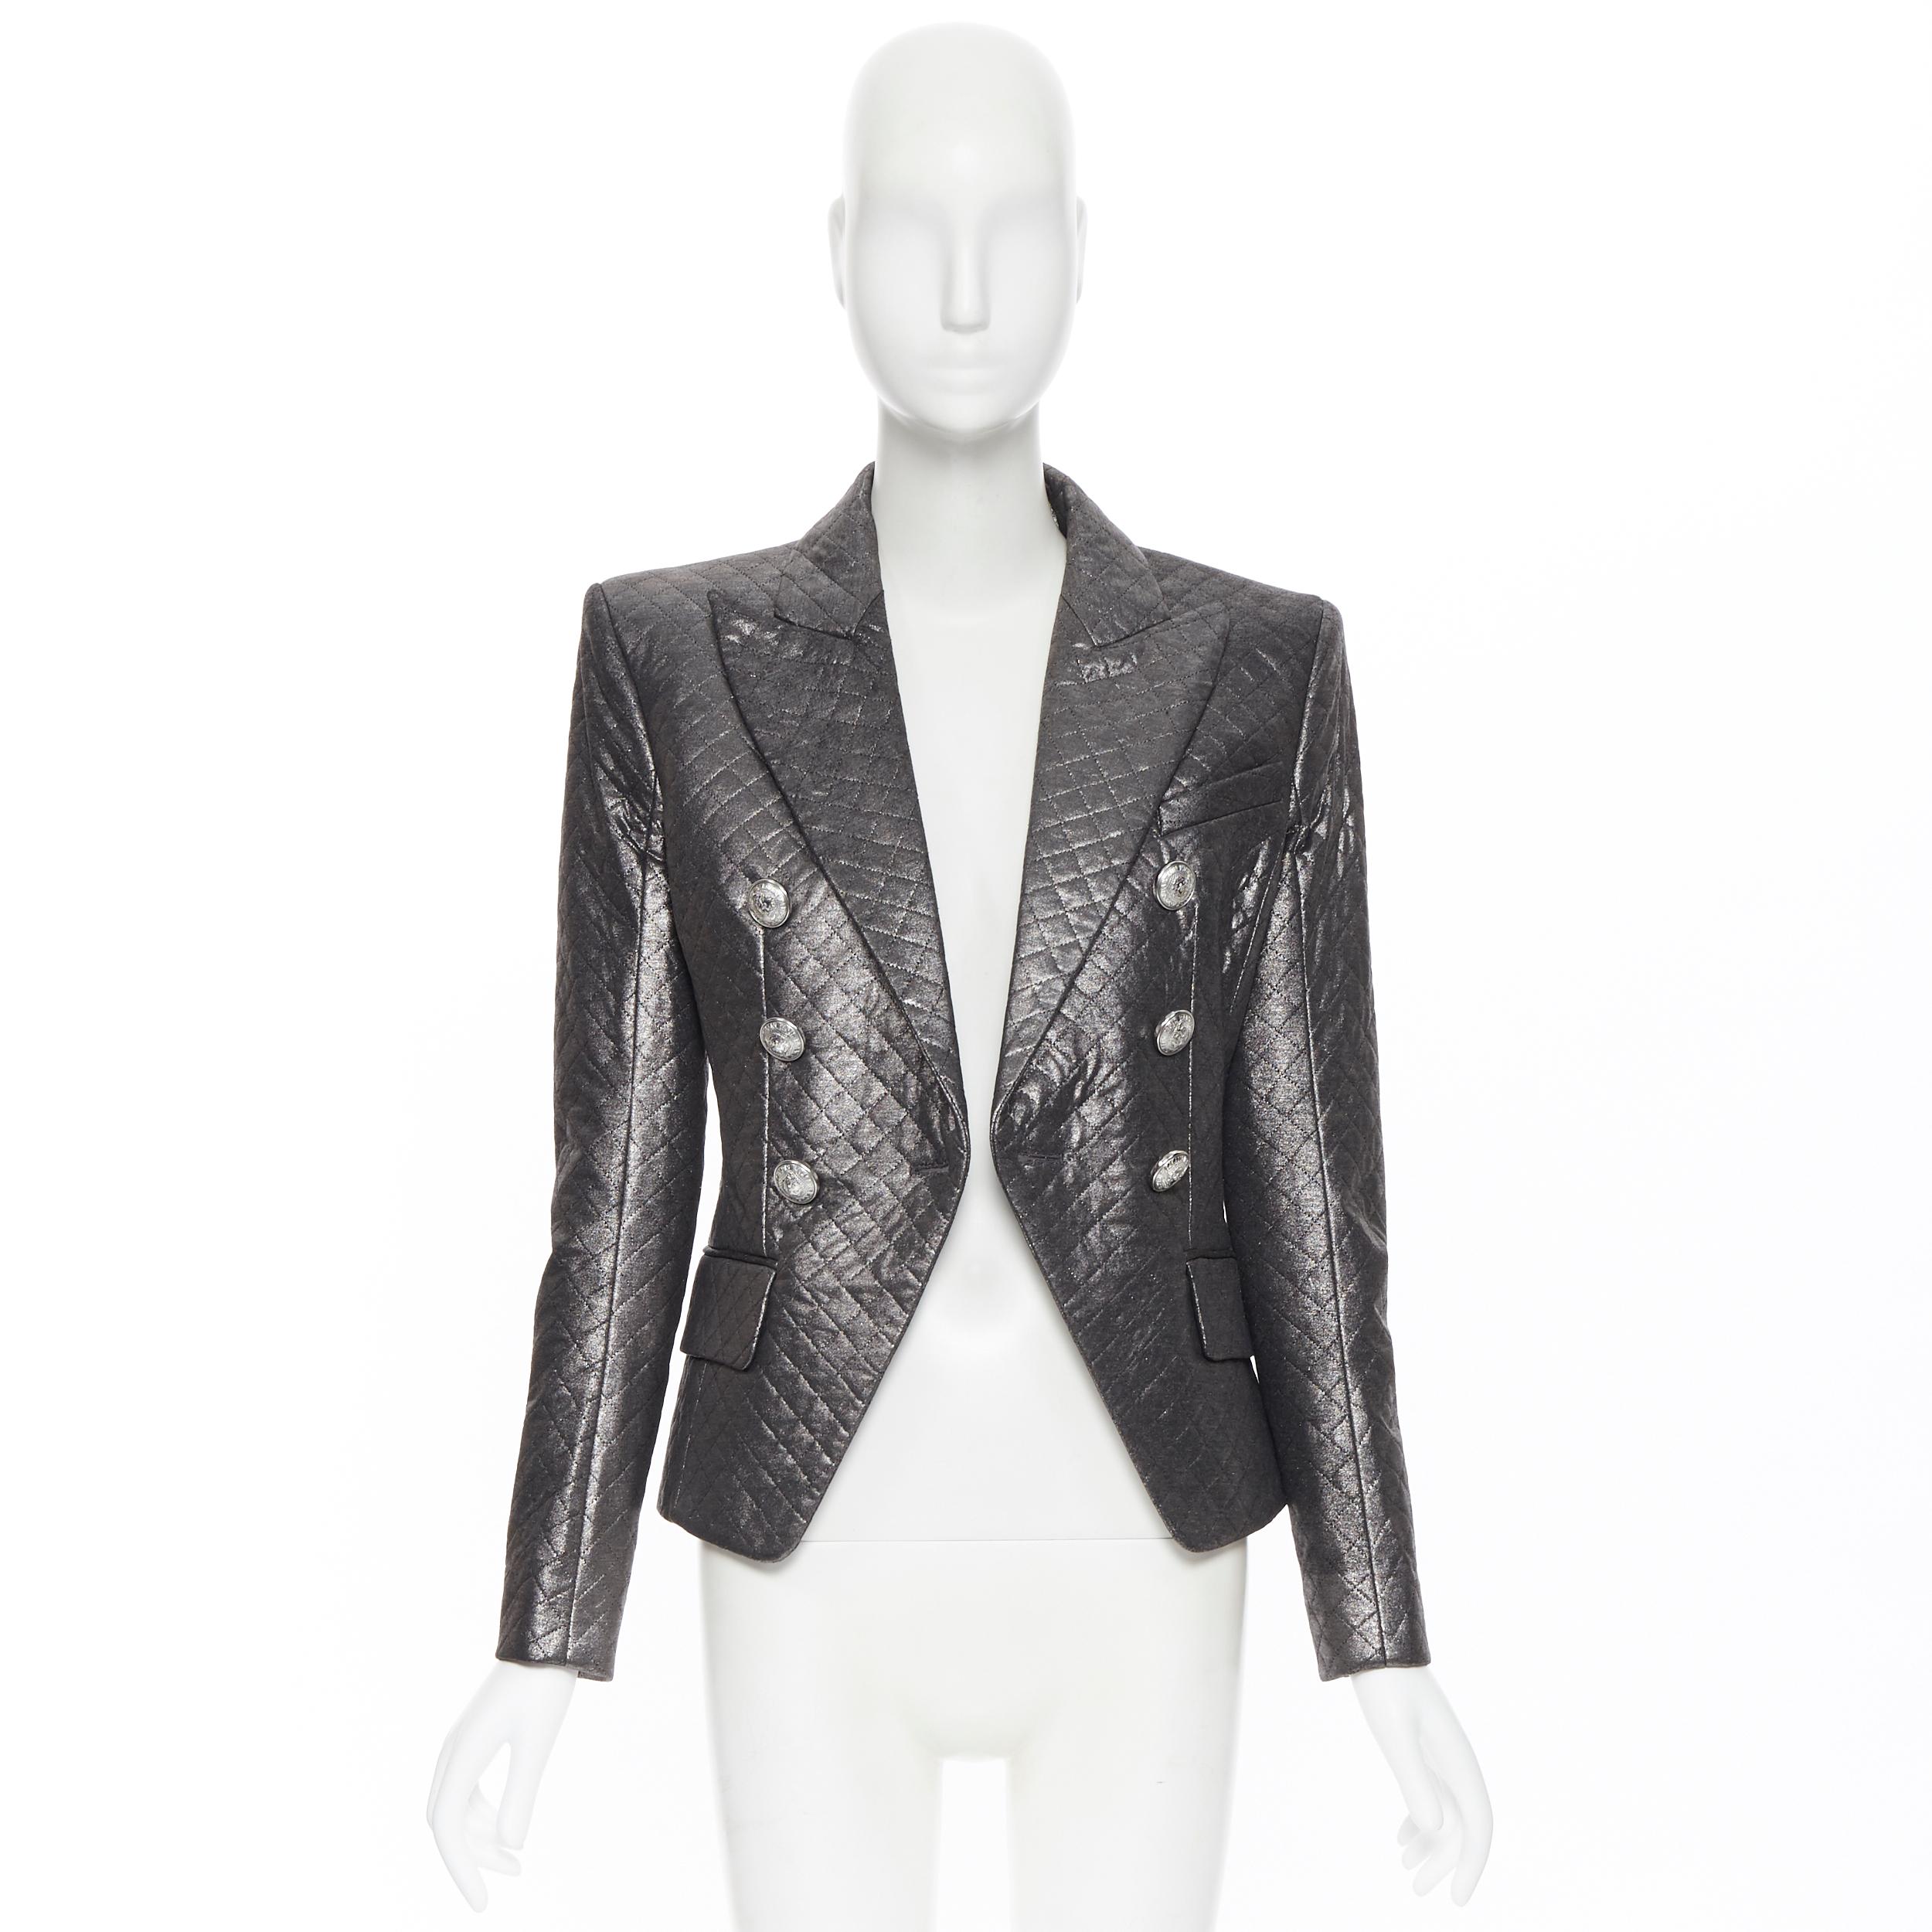 new BALMAIN silver  diamond quilted military double breasted blazer jacket FR34
Brand: Balmain
Designer: Olivier Rousteing
Model Name / Style: Double breasted jacket
Material: Viscose
Color: Silver
Pattern: Solid
Closure: Button
Extra Detail: A